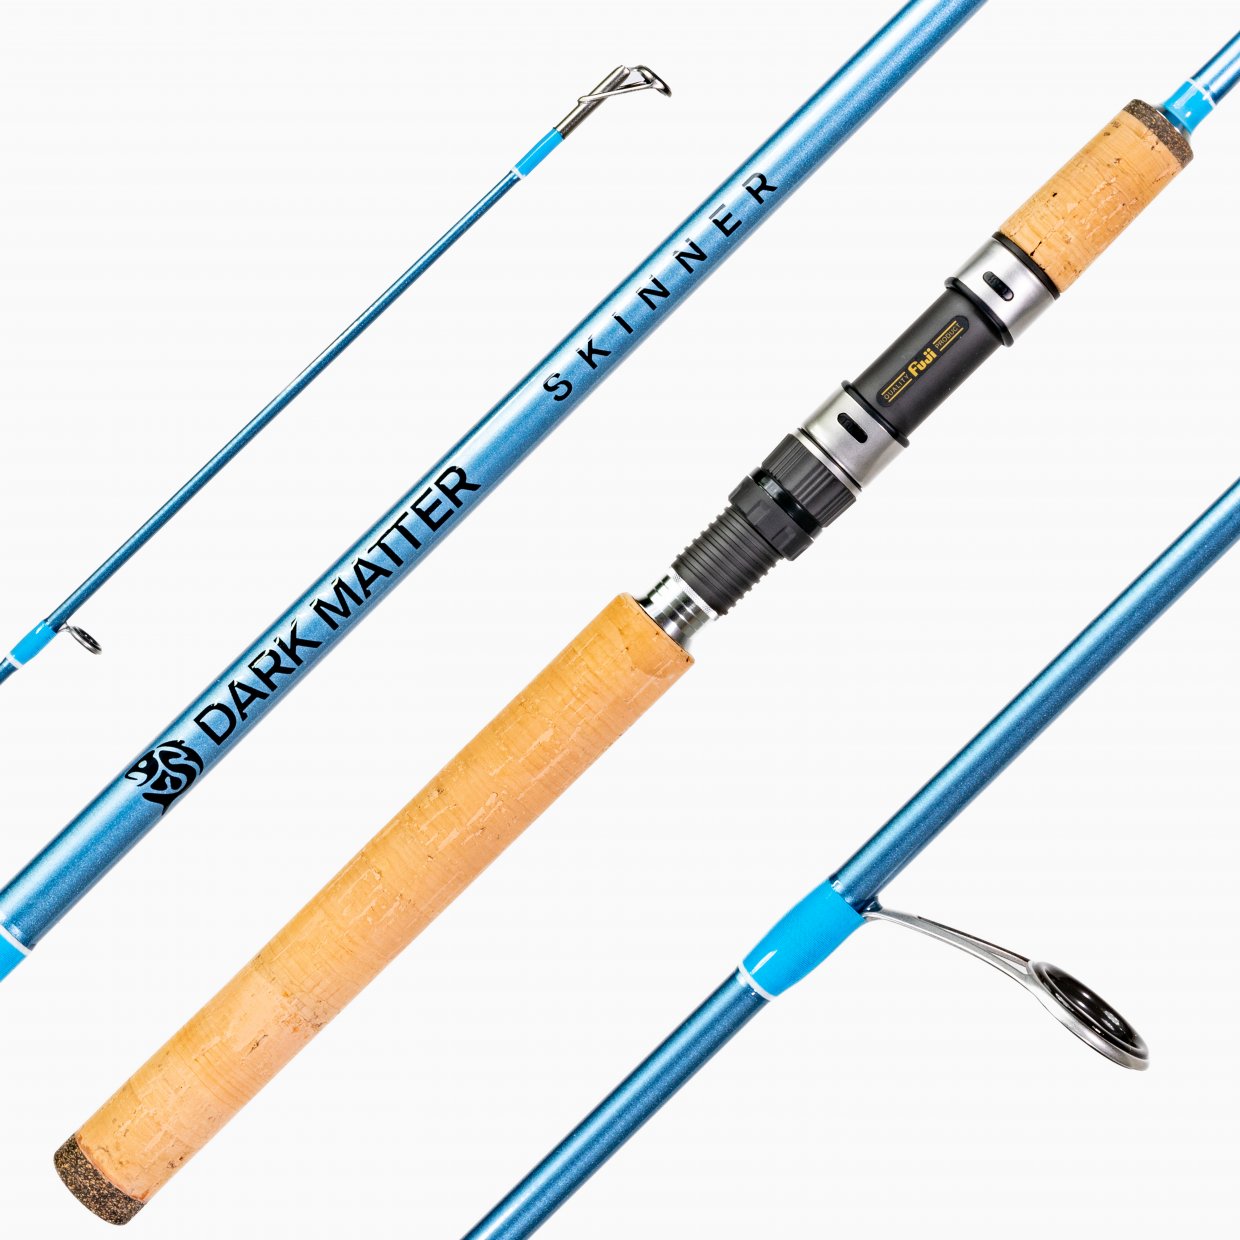 Fishing a Dark Matter OB Surf Spinning Rod in the open beach is an absolute  pleasure! 10' 2-piece and it weighs just 7 oz. Use a small sp